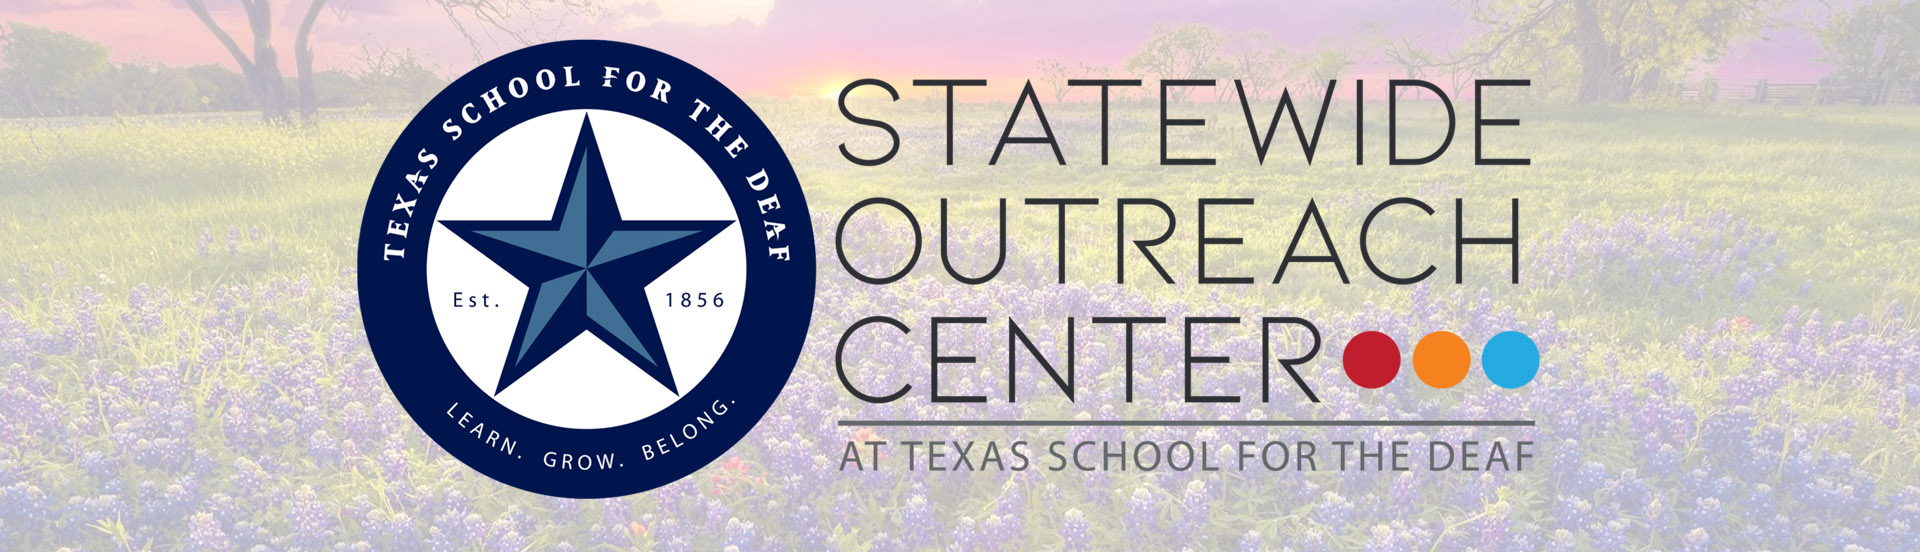 Statewide Outreach Center at Texas School for the Deaf